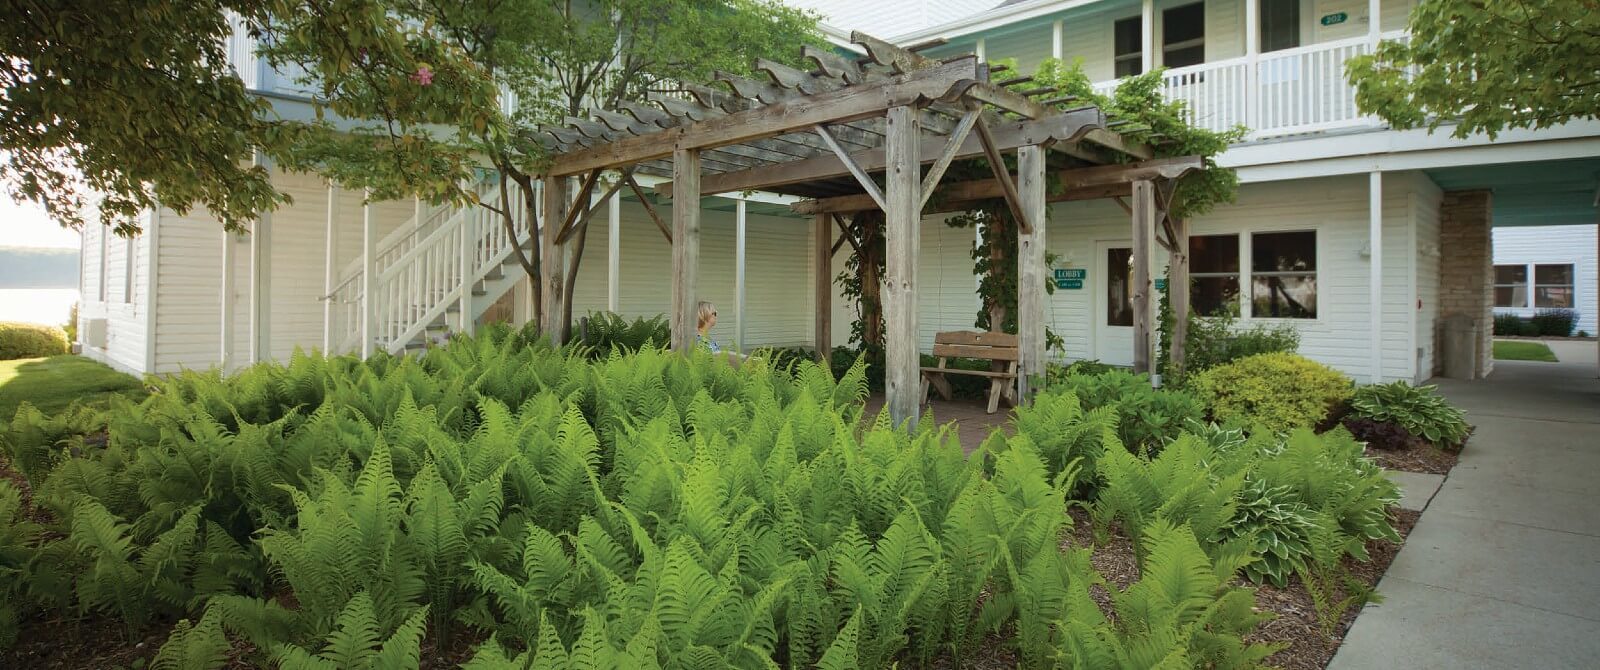 Exterior of a two story hotel building with walkway next to a pergola nestled among a field of green ferns